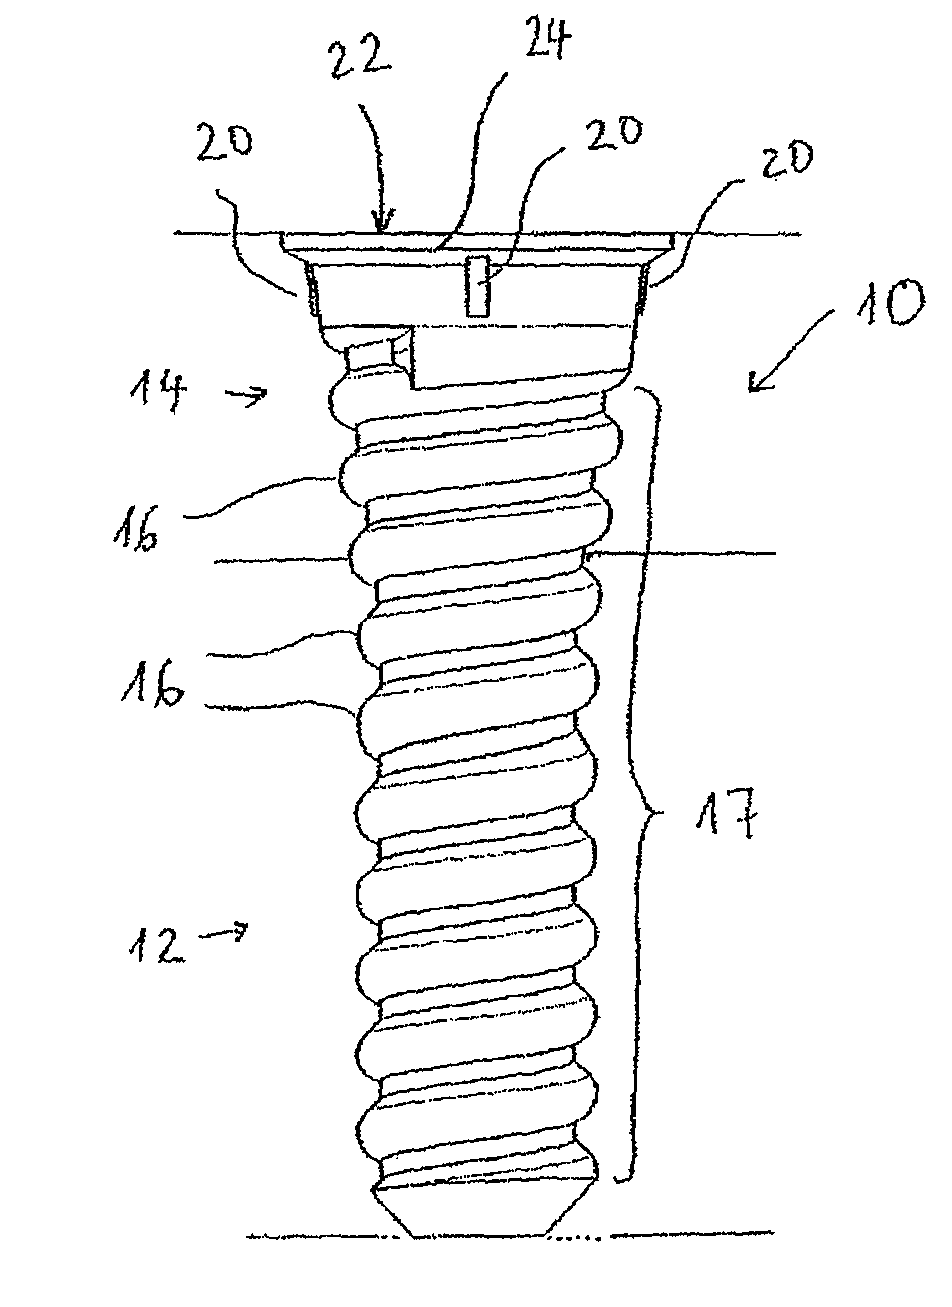 Screw anchor with conical head for rail attachment